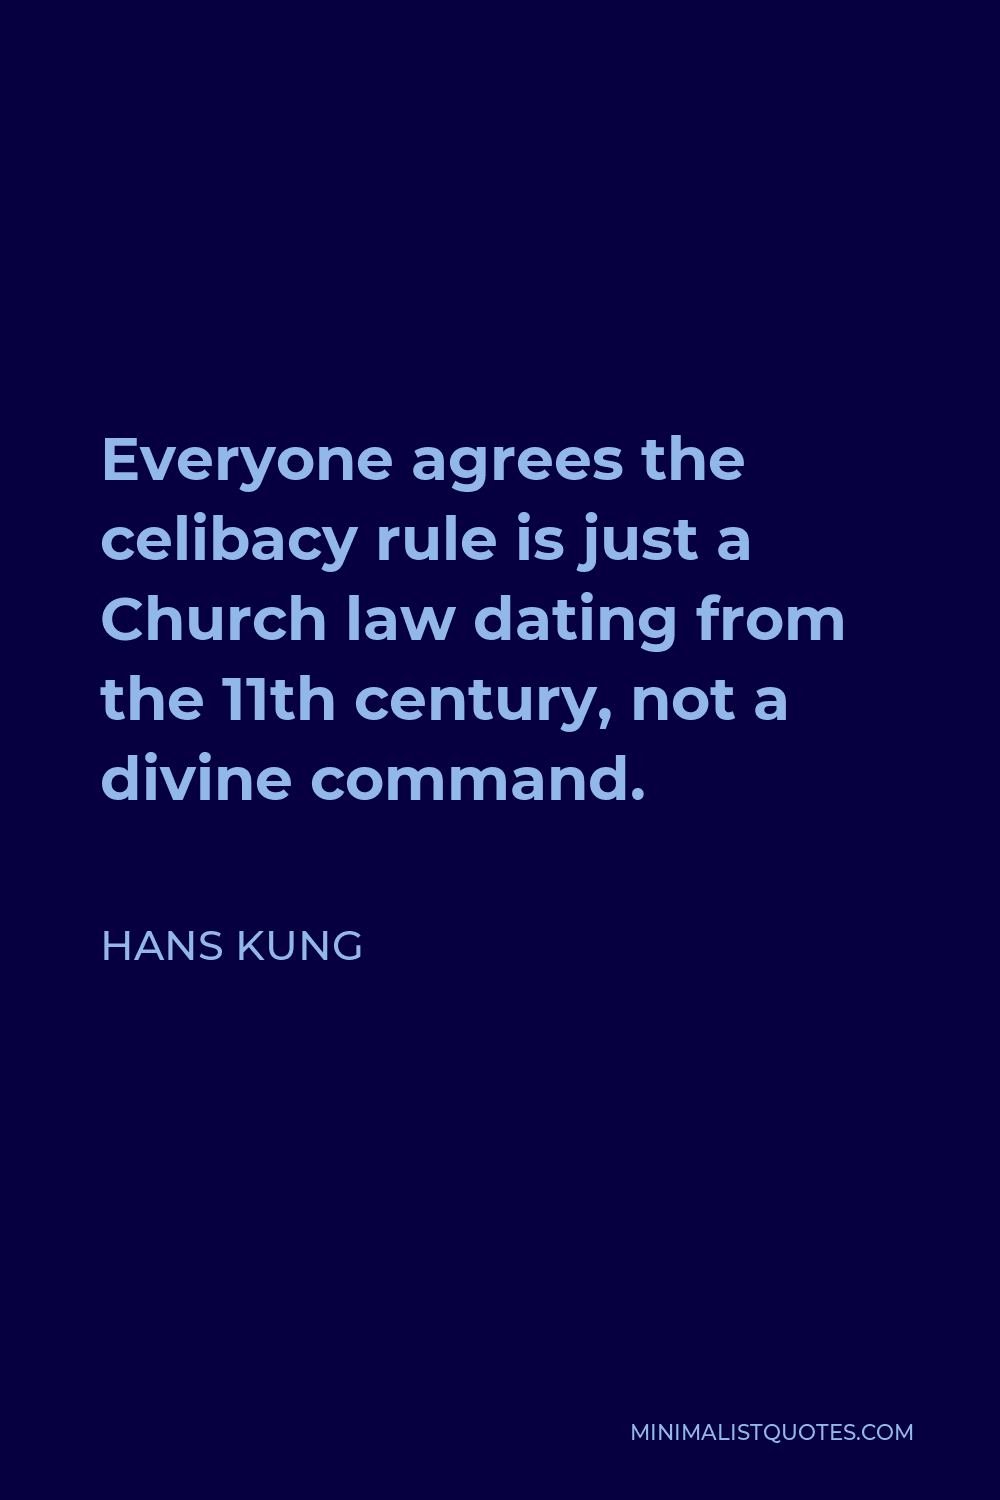 Hans Kung Quote - Everyone agrees the celibacy rule is just a Church law dating from the 11th century, not a divine command.